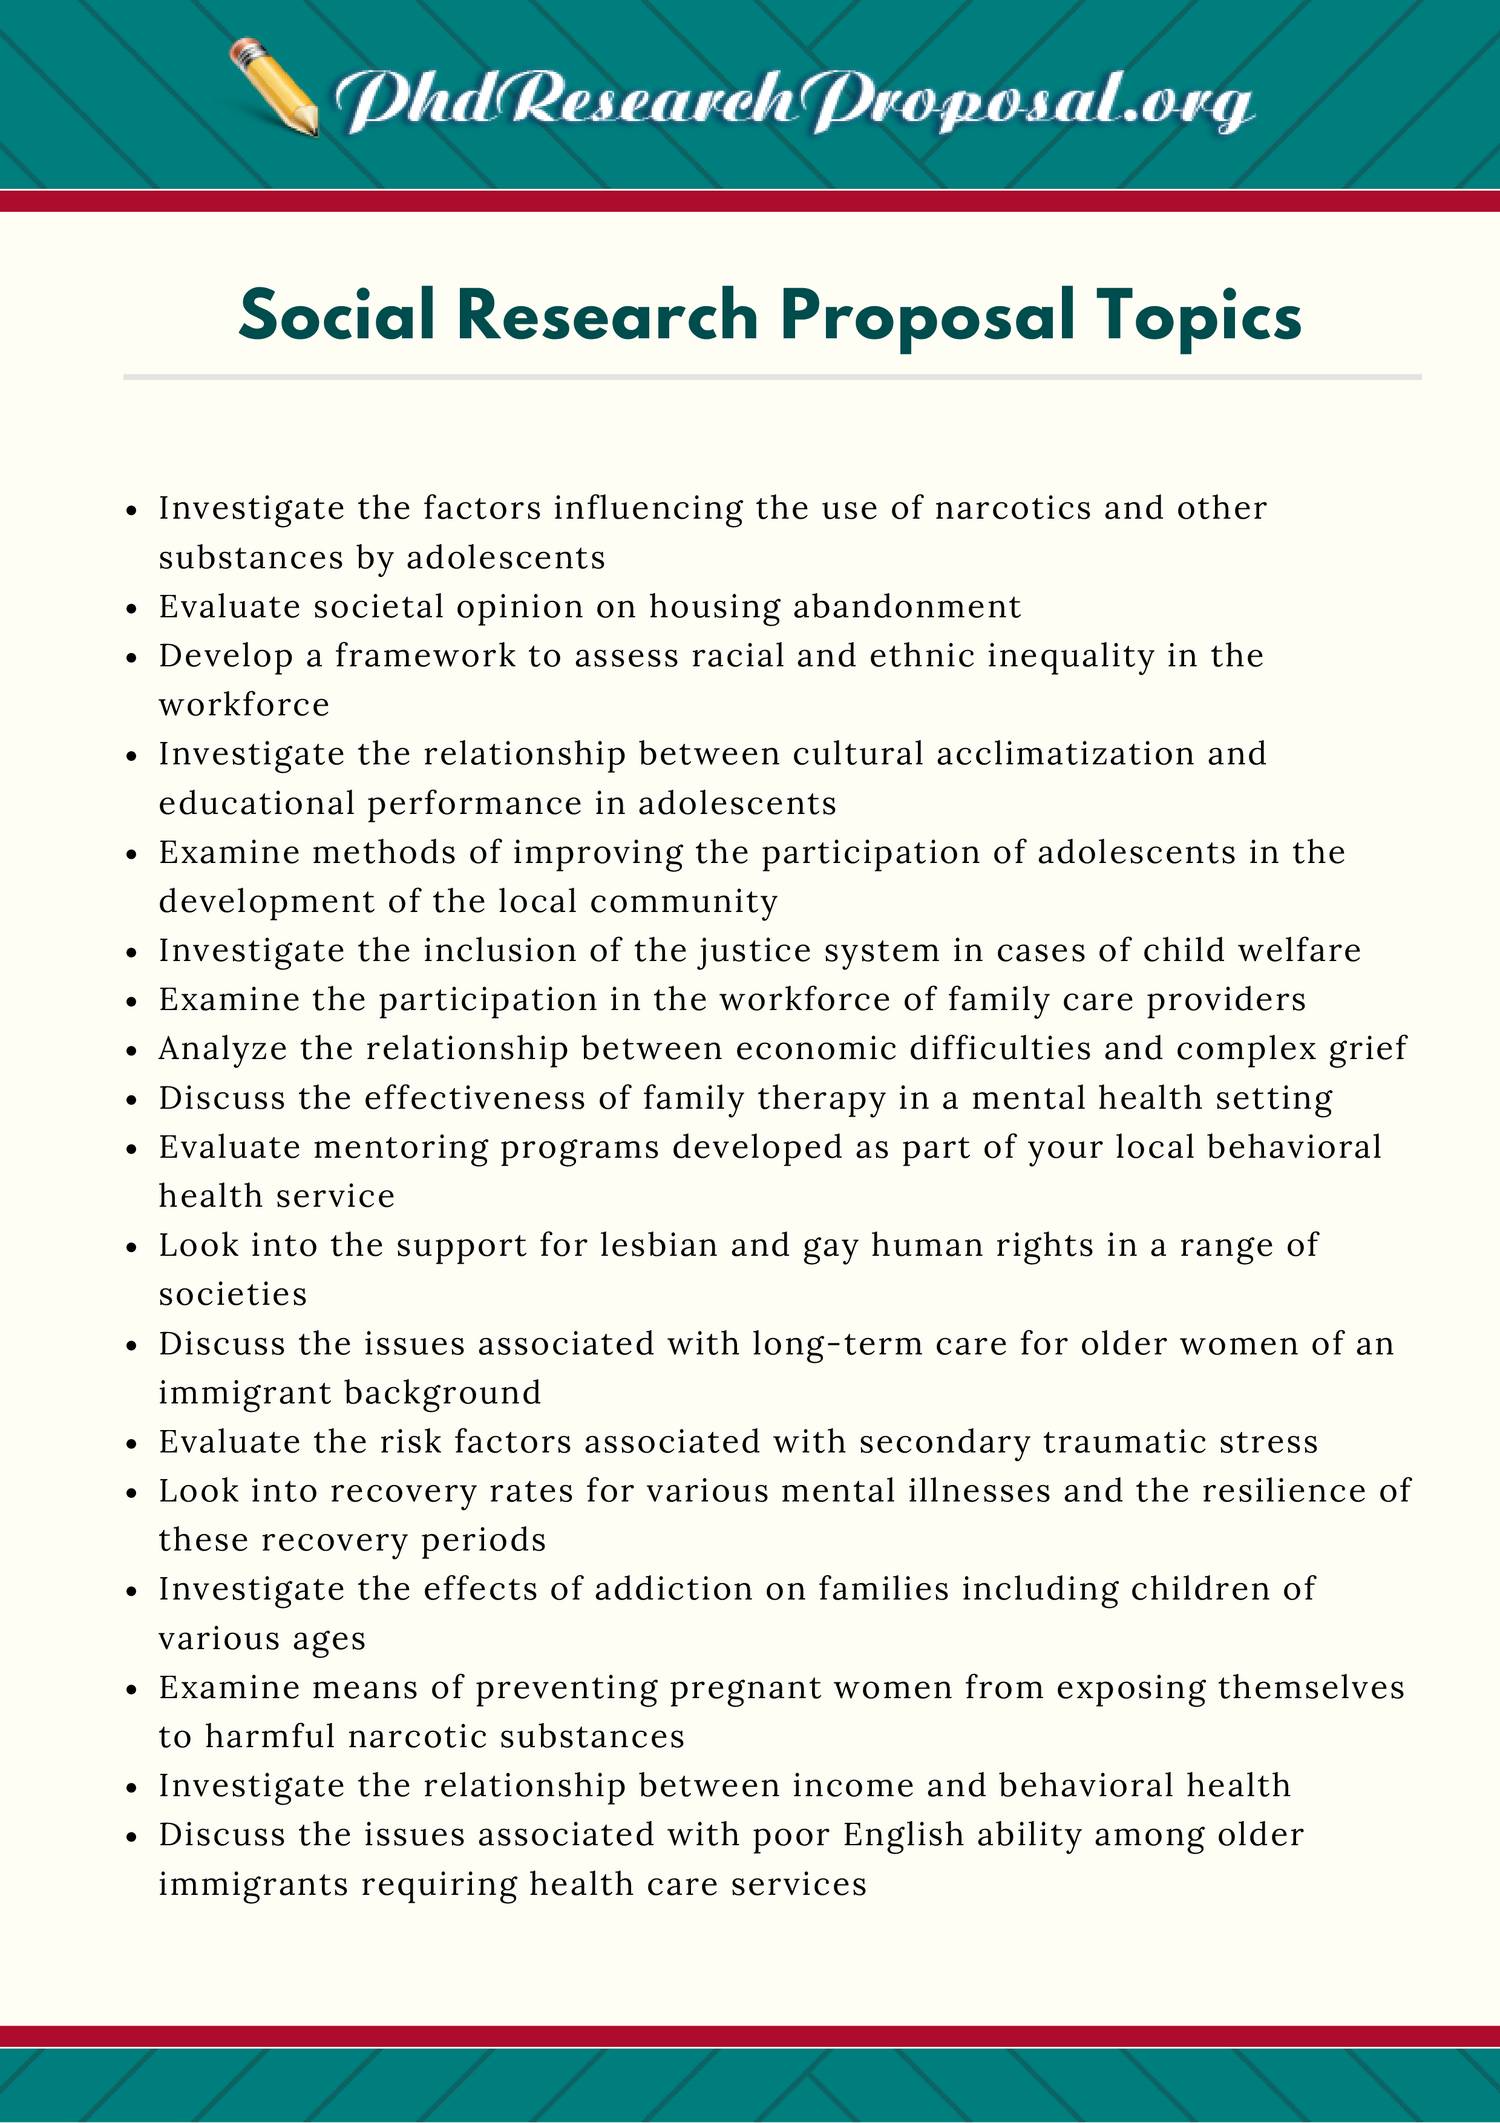 research on social work practice